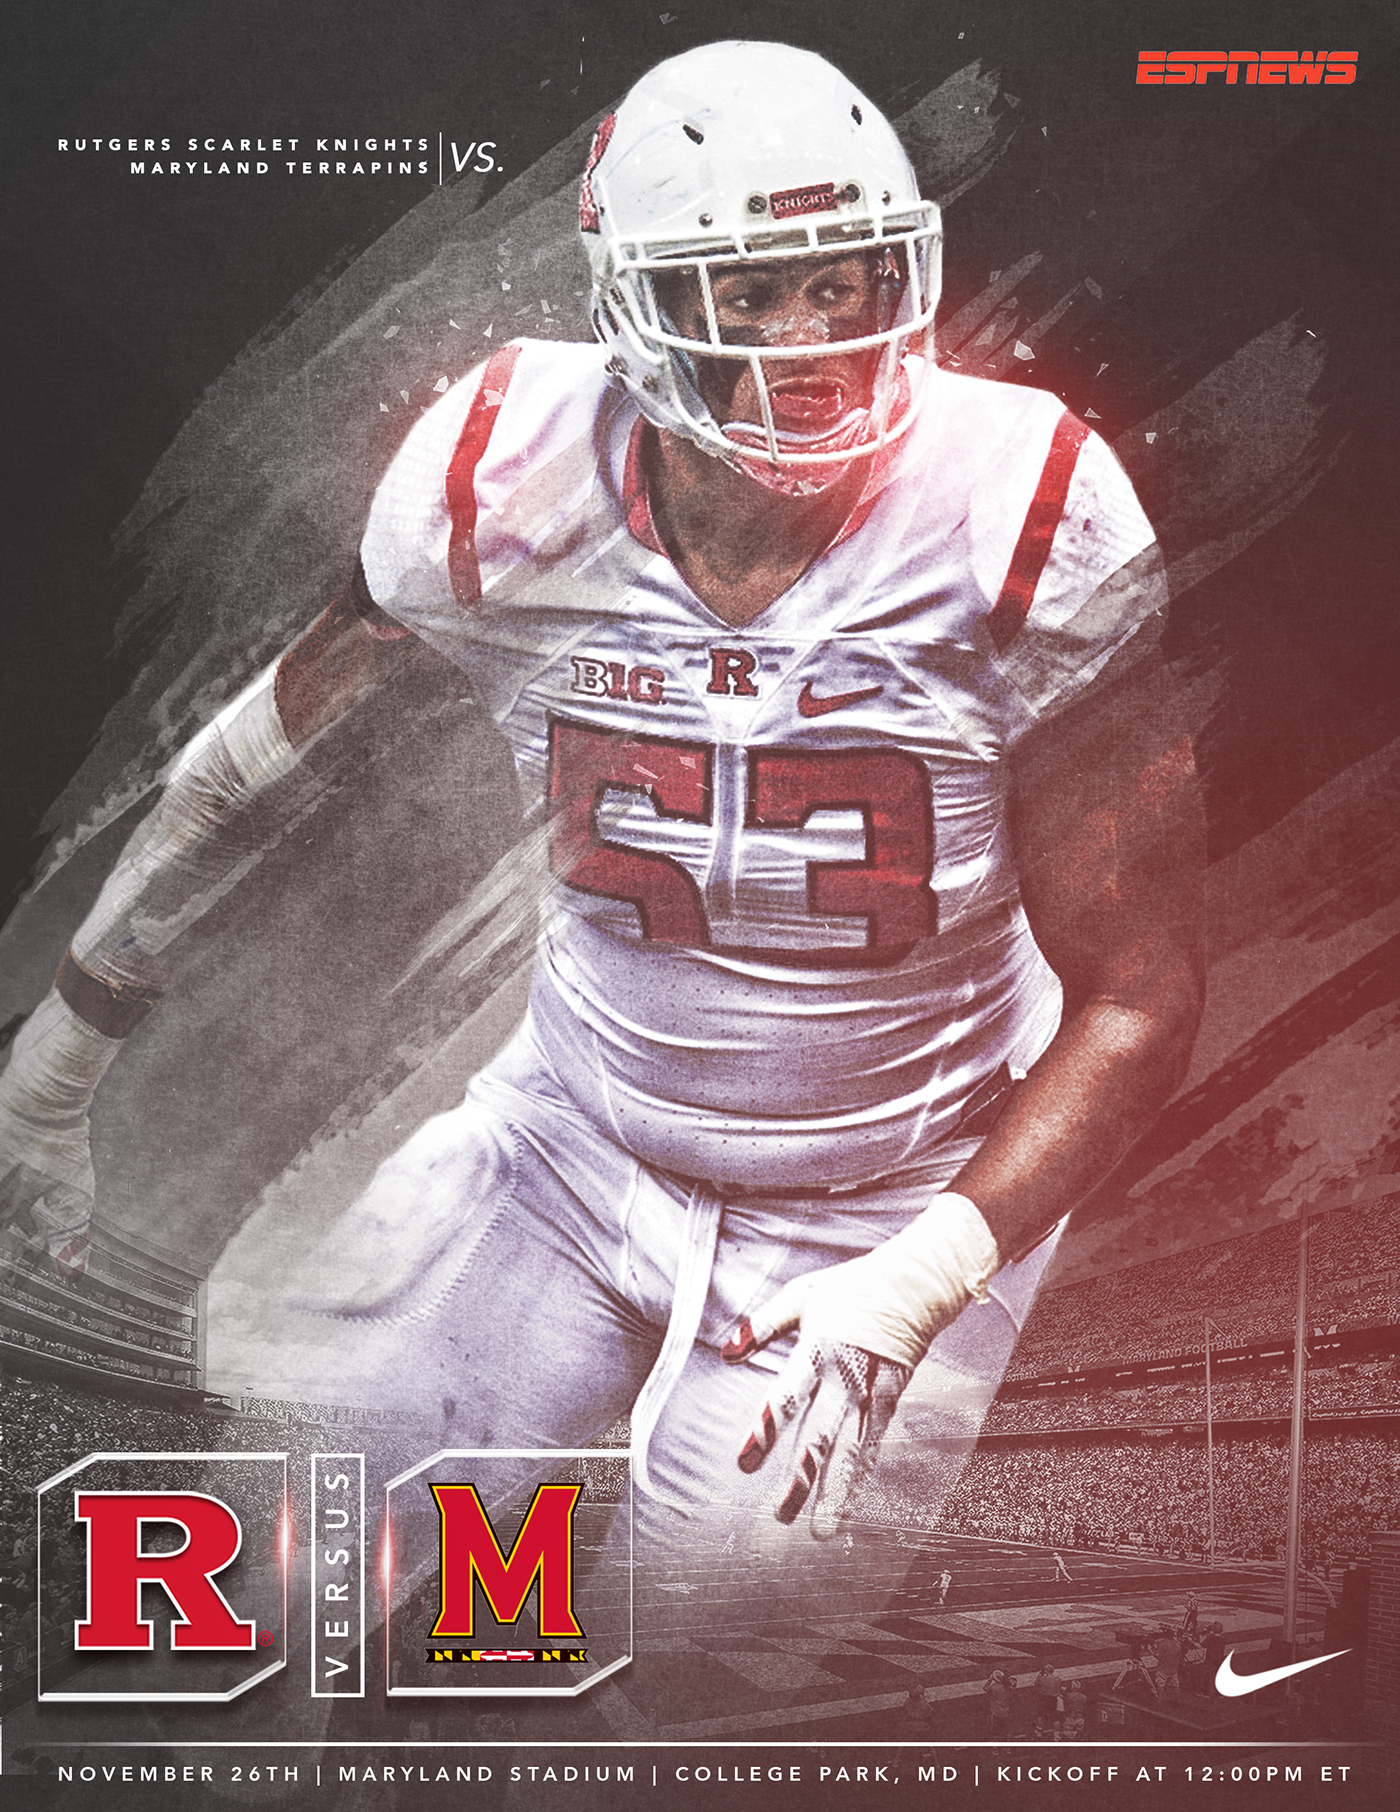 Rutgers college football NCAA sports knights game scarlet knights